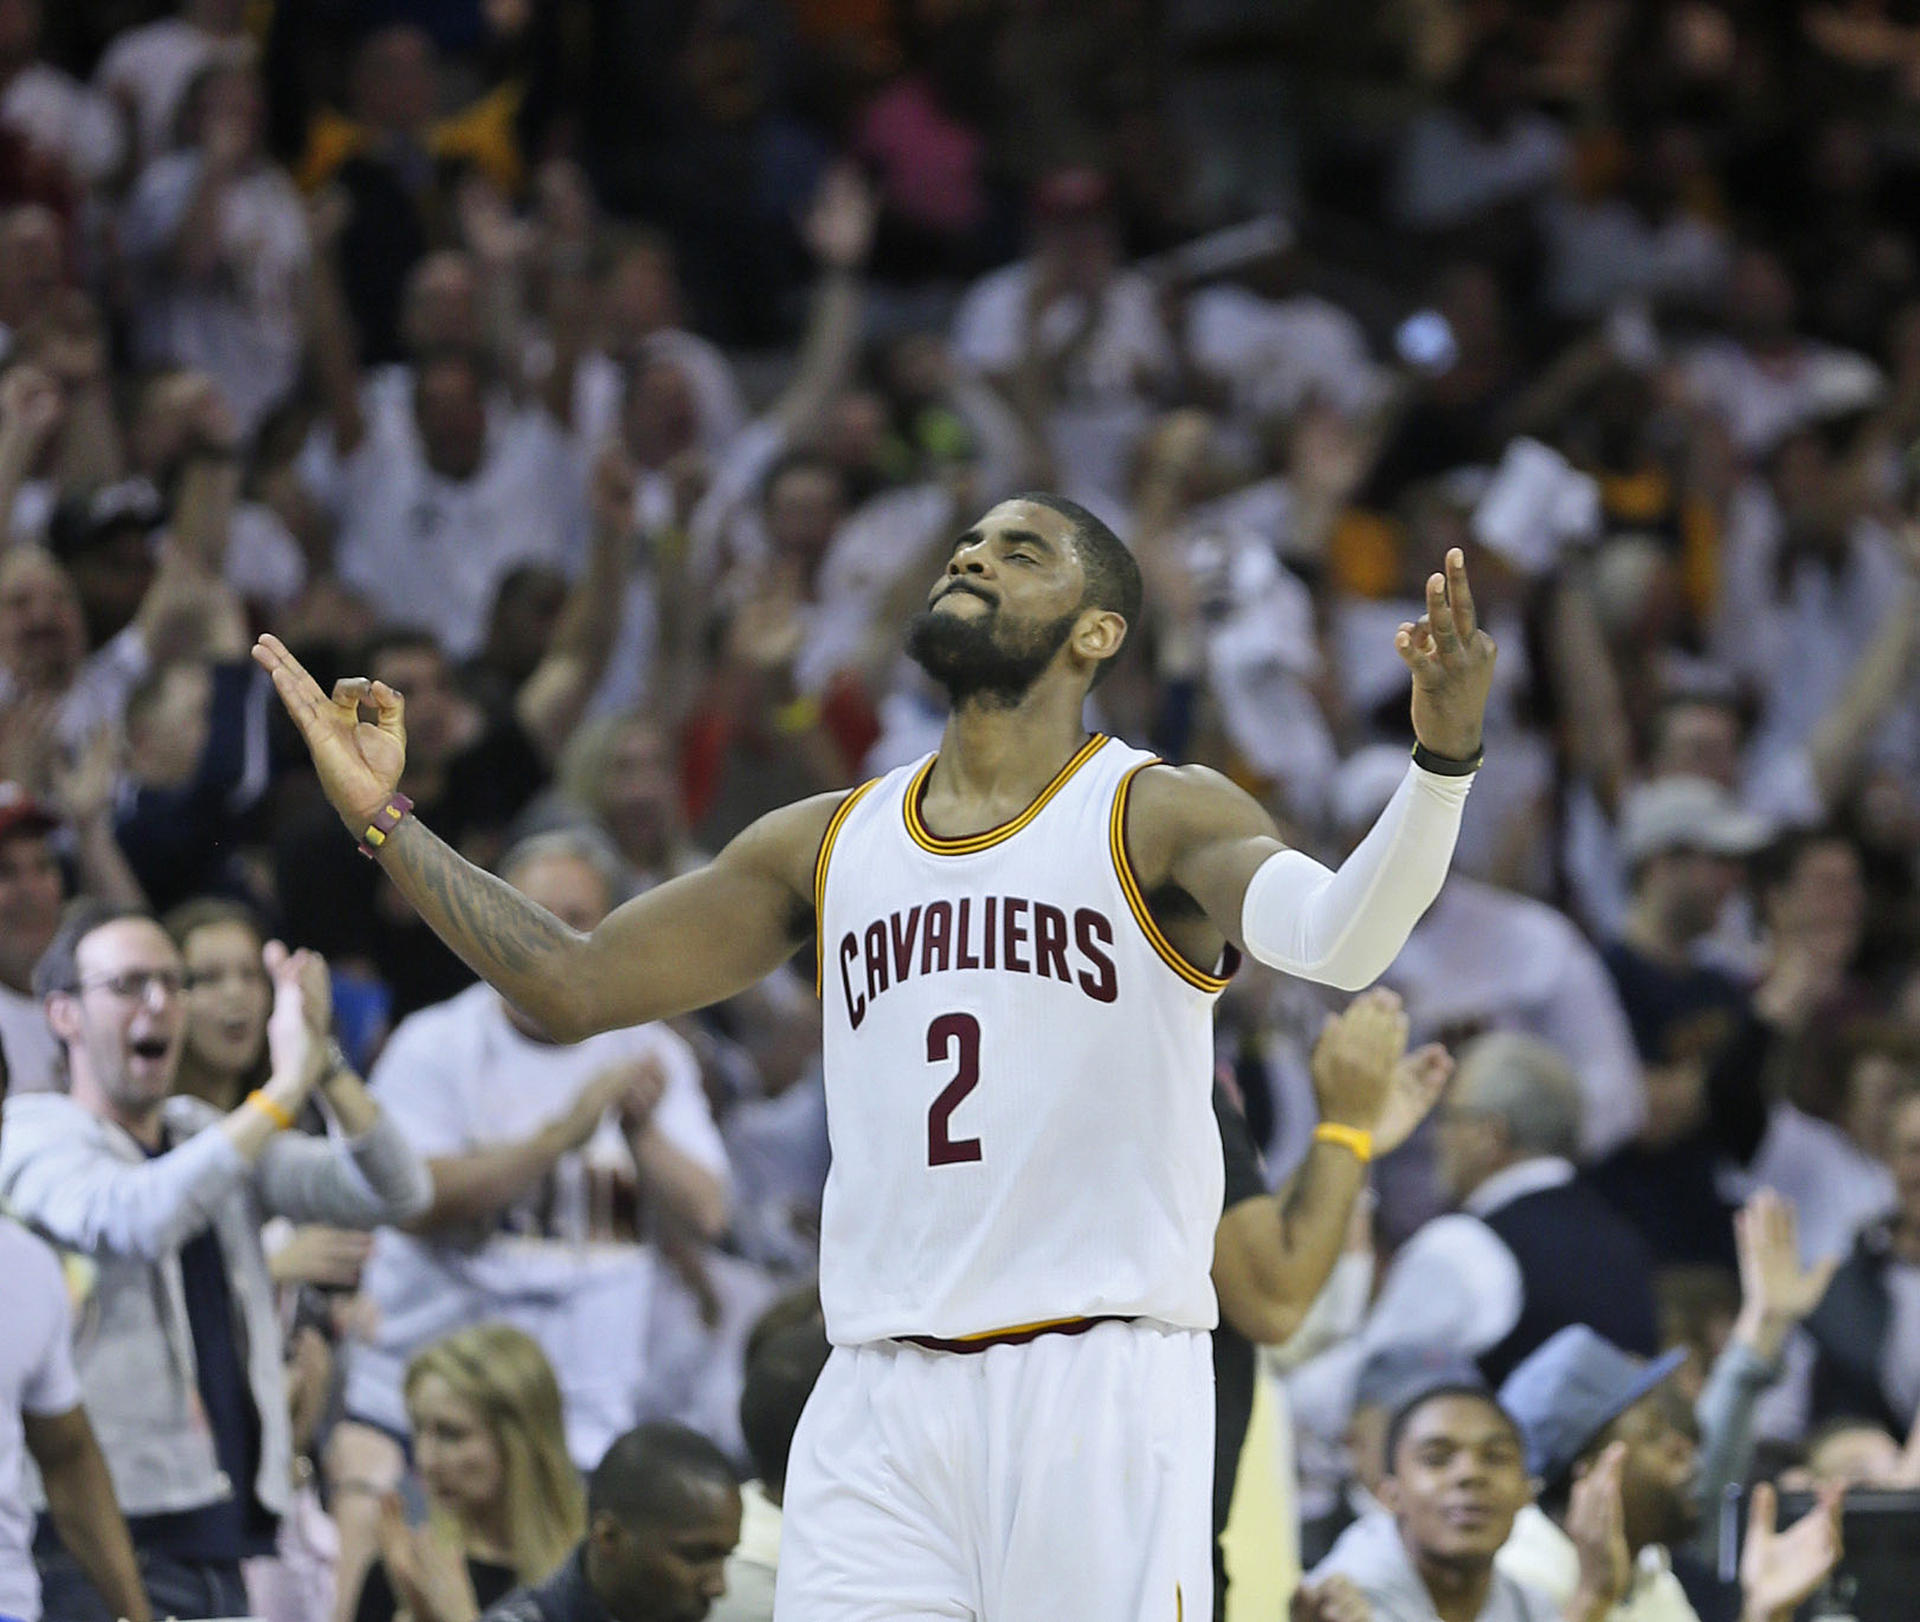 The Cavaliers' Kyrie Irving celebrates after he sinks a three-pointer against the Boston Celtics at Quicken Loans Arena. Irving scored 30 points for his team. Photo: TNS